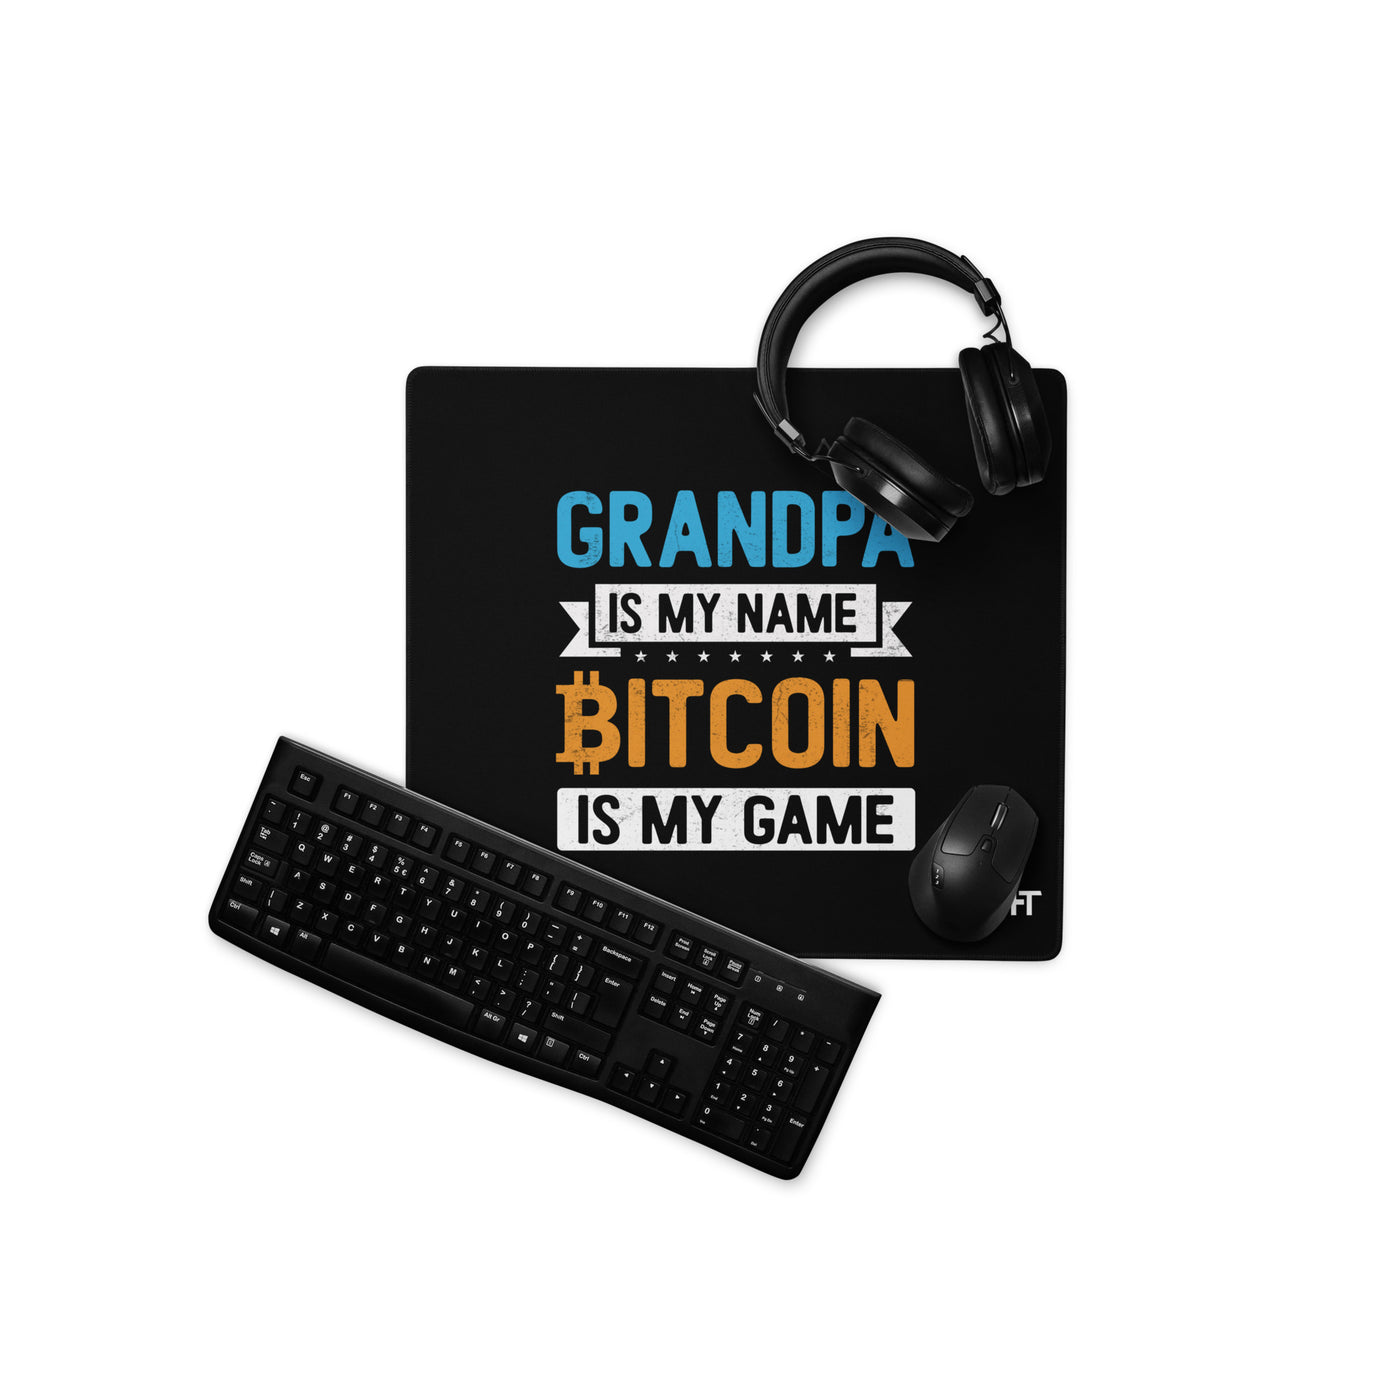 Grandpa is My Name, Bitcoin is My Game - Desk Mat